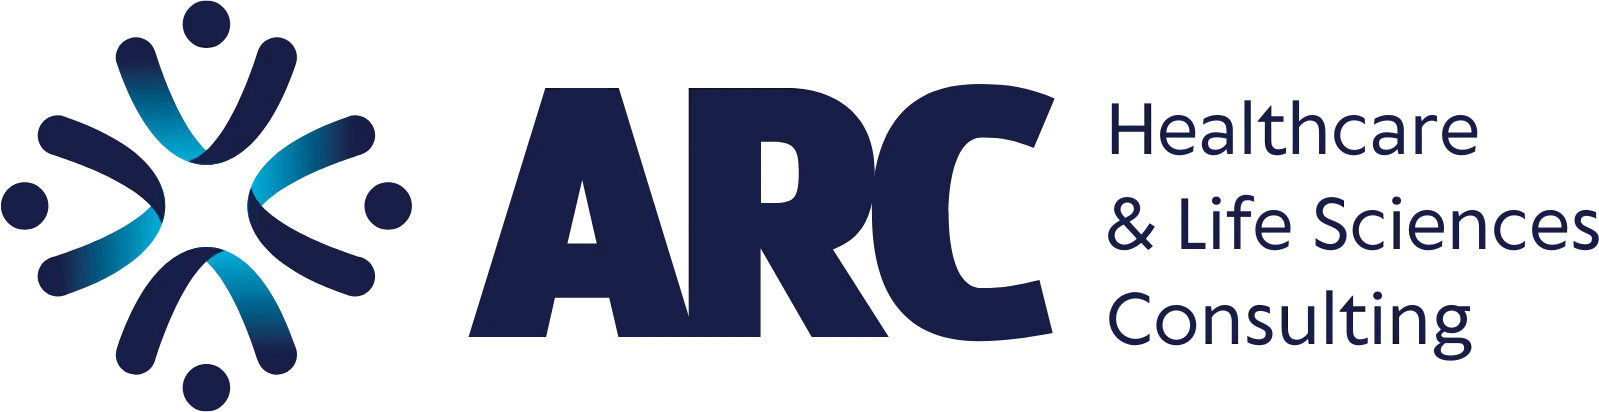 ARC Healthcare and Life Sciences